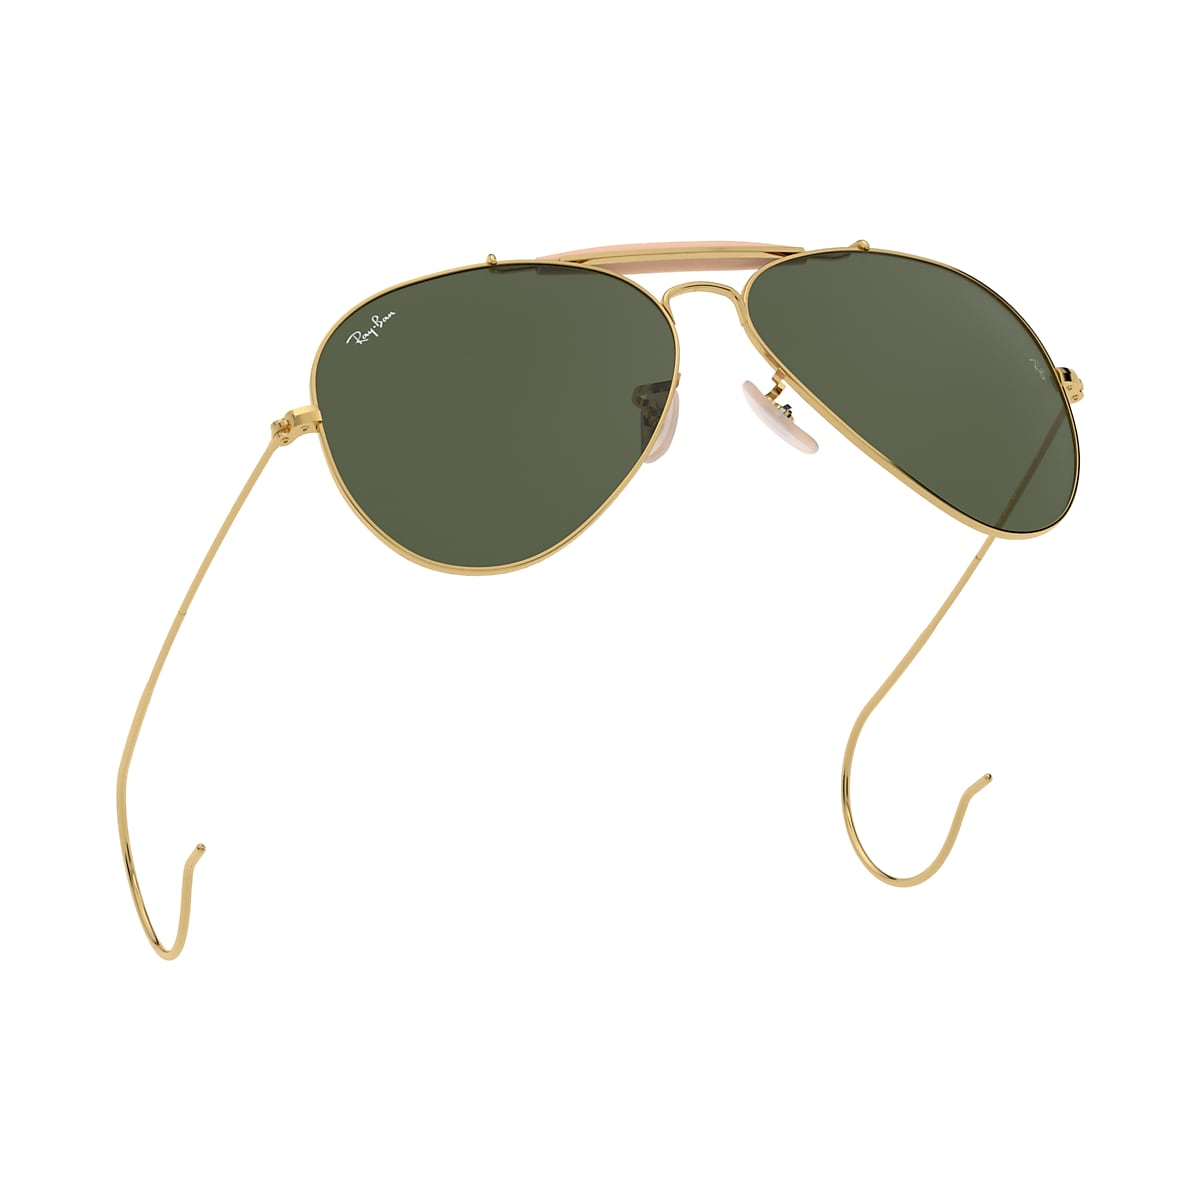 Outdoorsman Sunglasses Gold and Green |